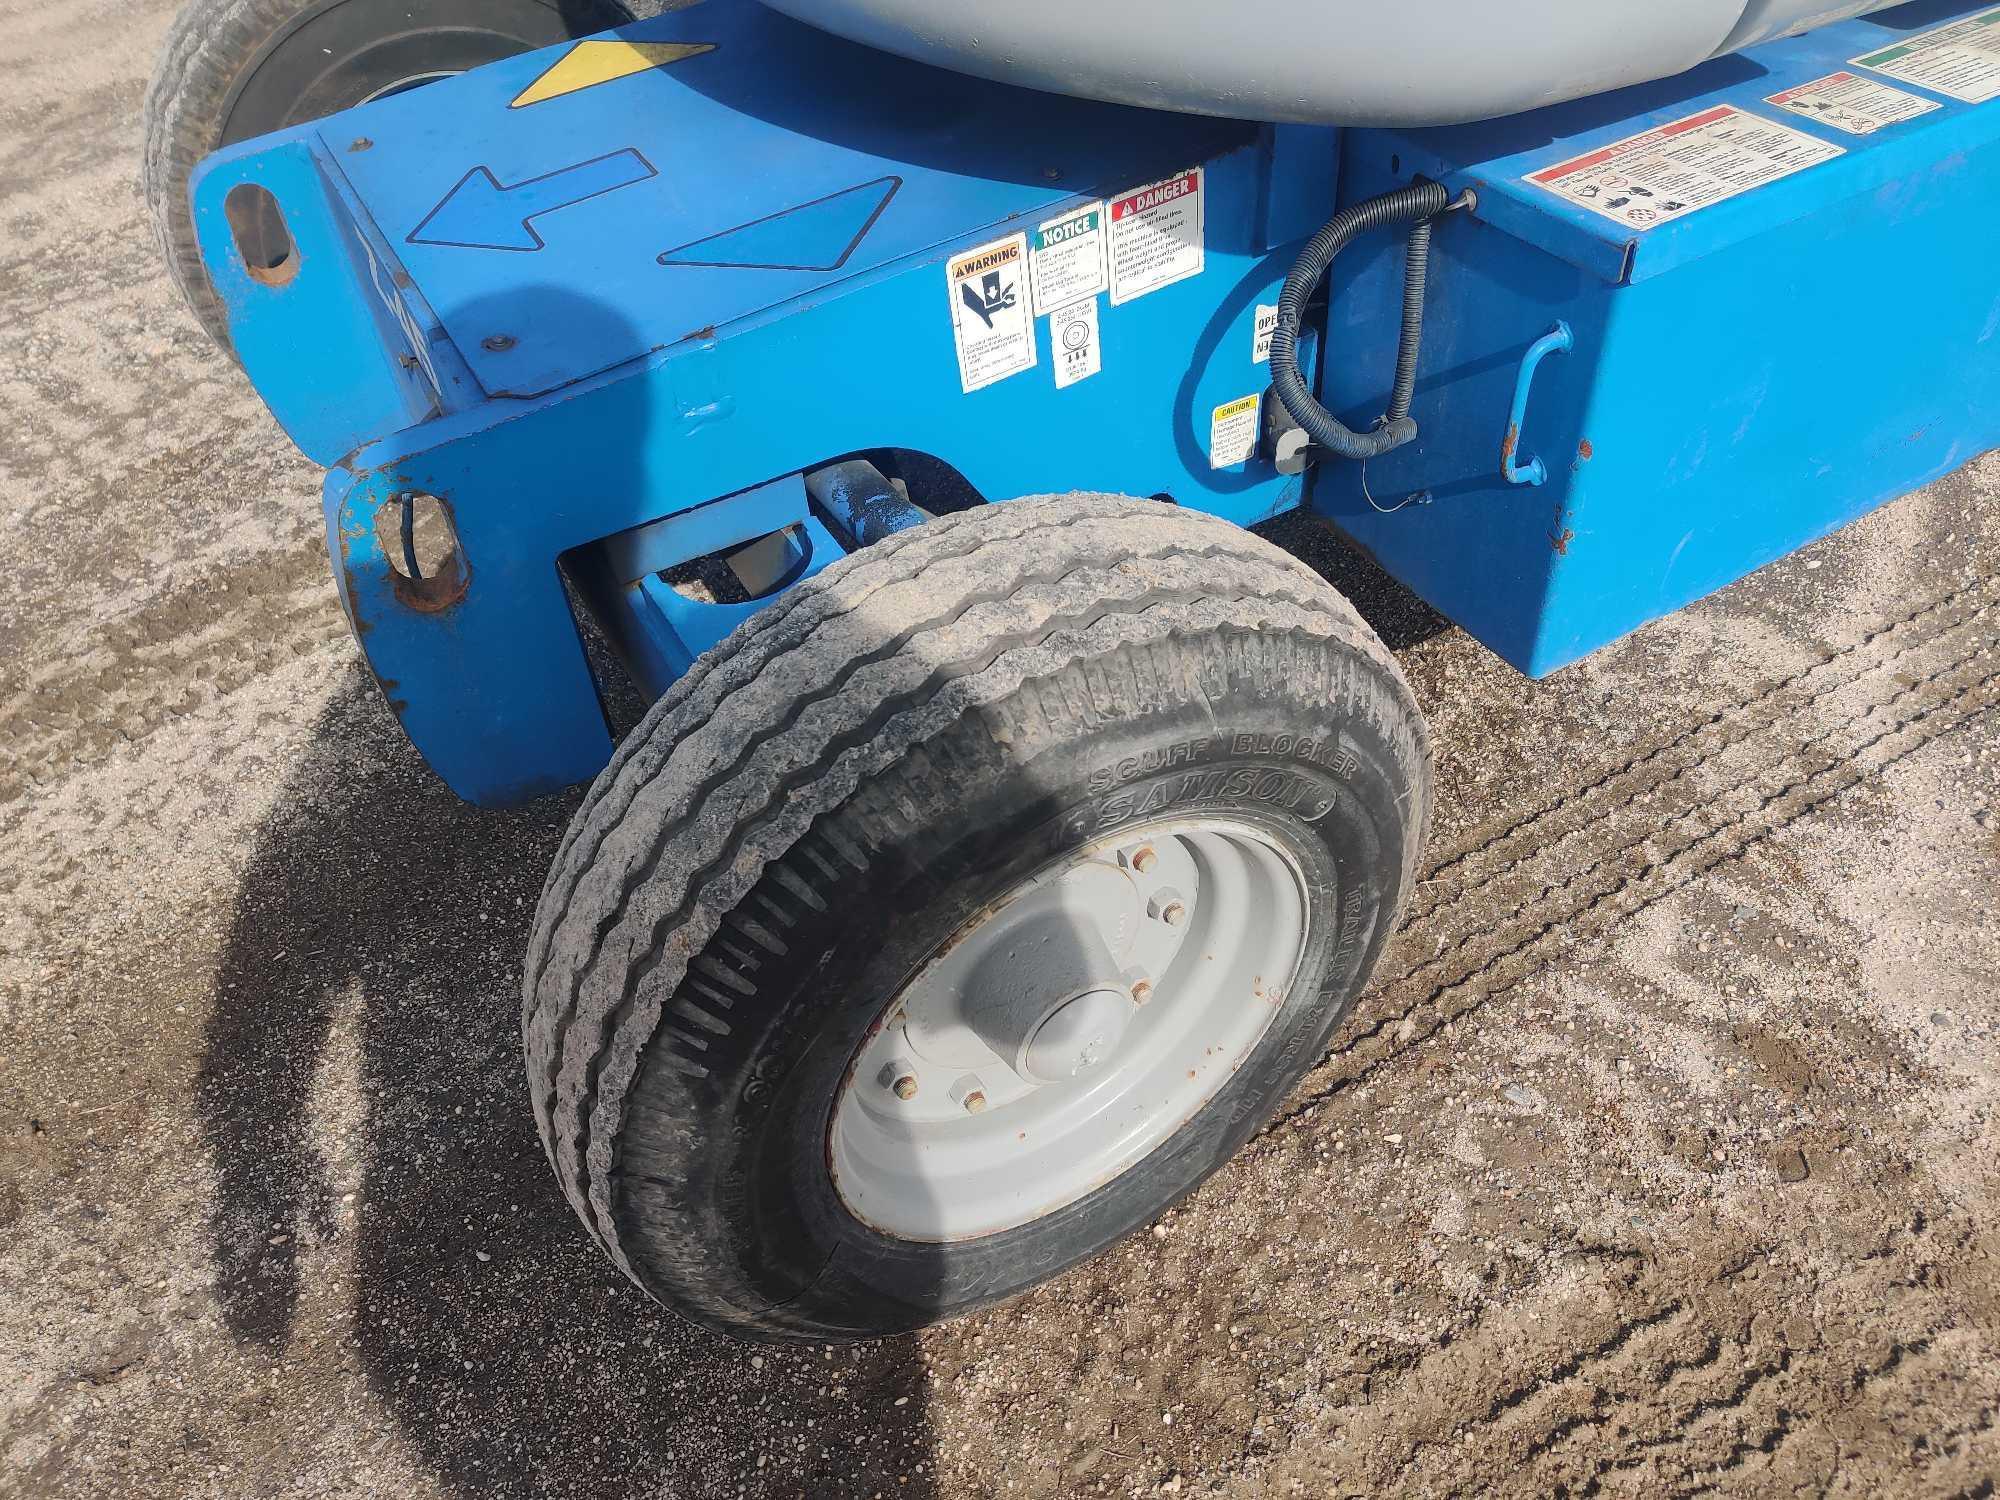 GENIE Z45/25 BOOM LIFT SN:28903 4x4, powered by diesel engine, equipped with 45ft. Platform height,